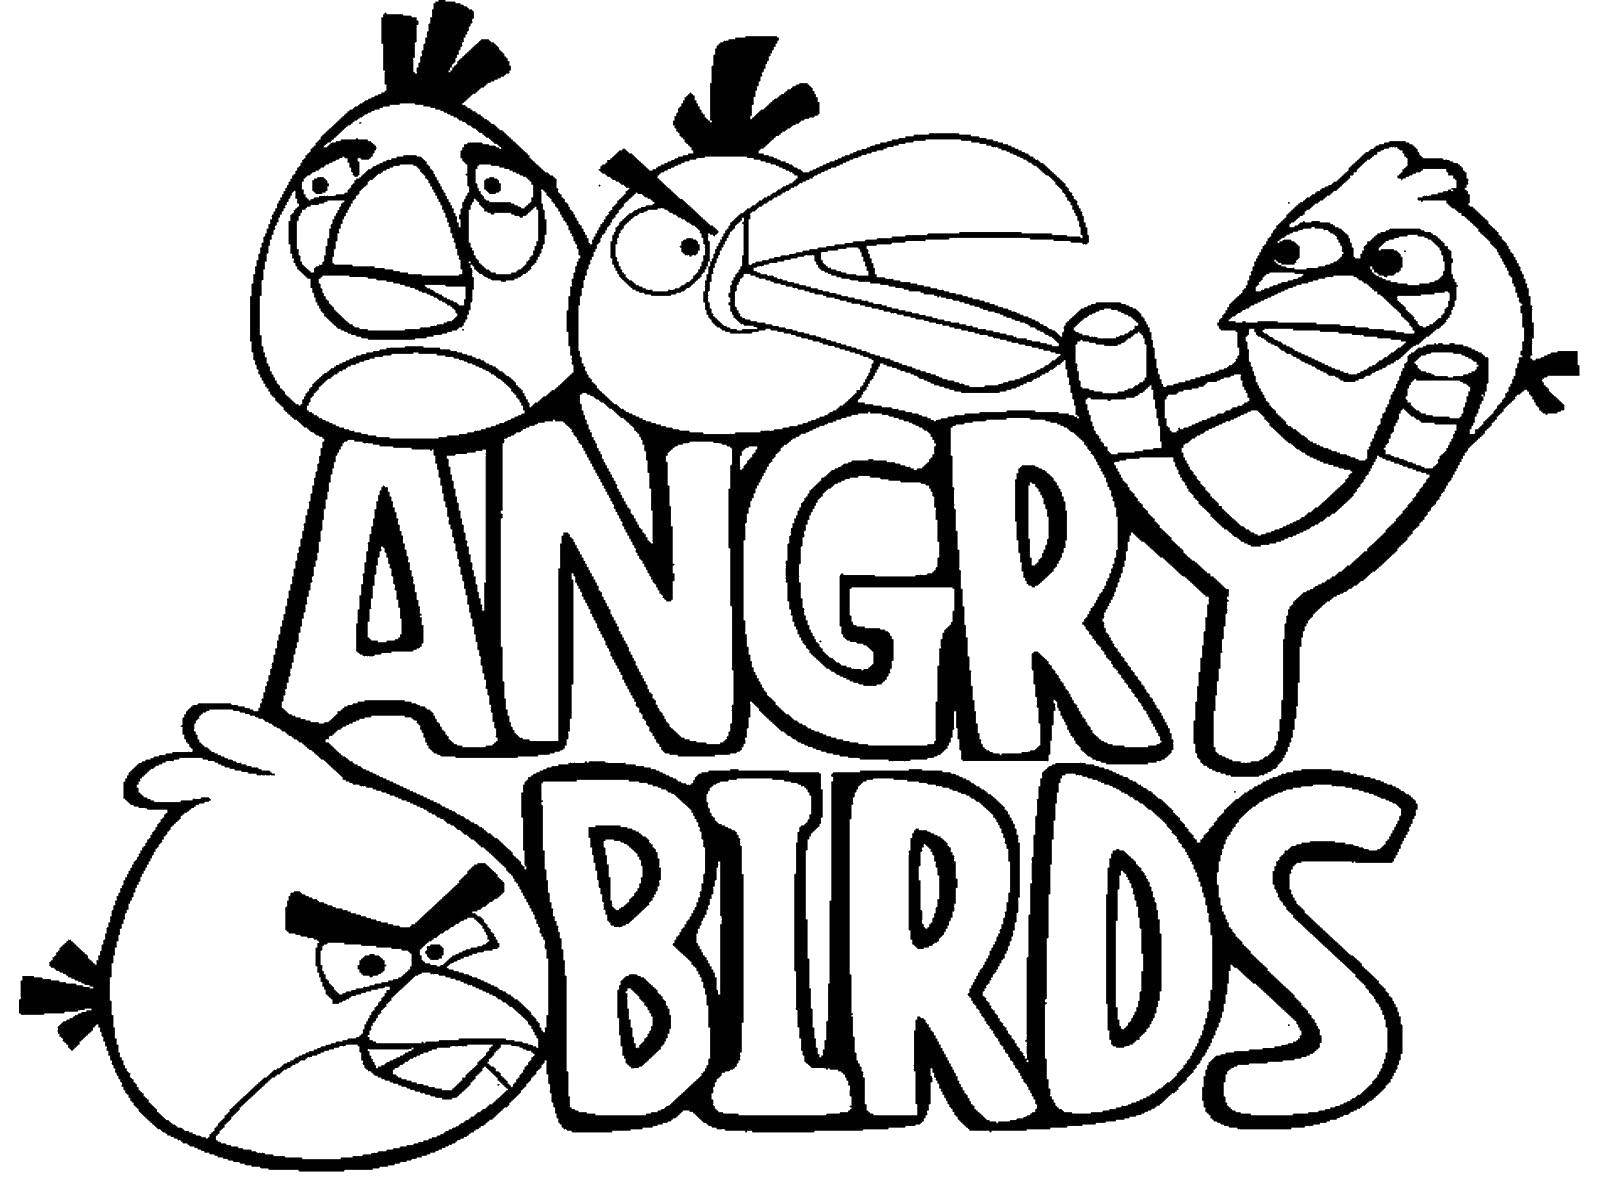 Coloring The game angry birds. Category games. Tags:  games, phone, angry birds.